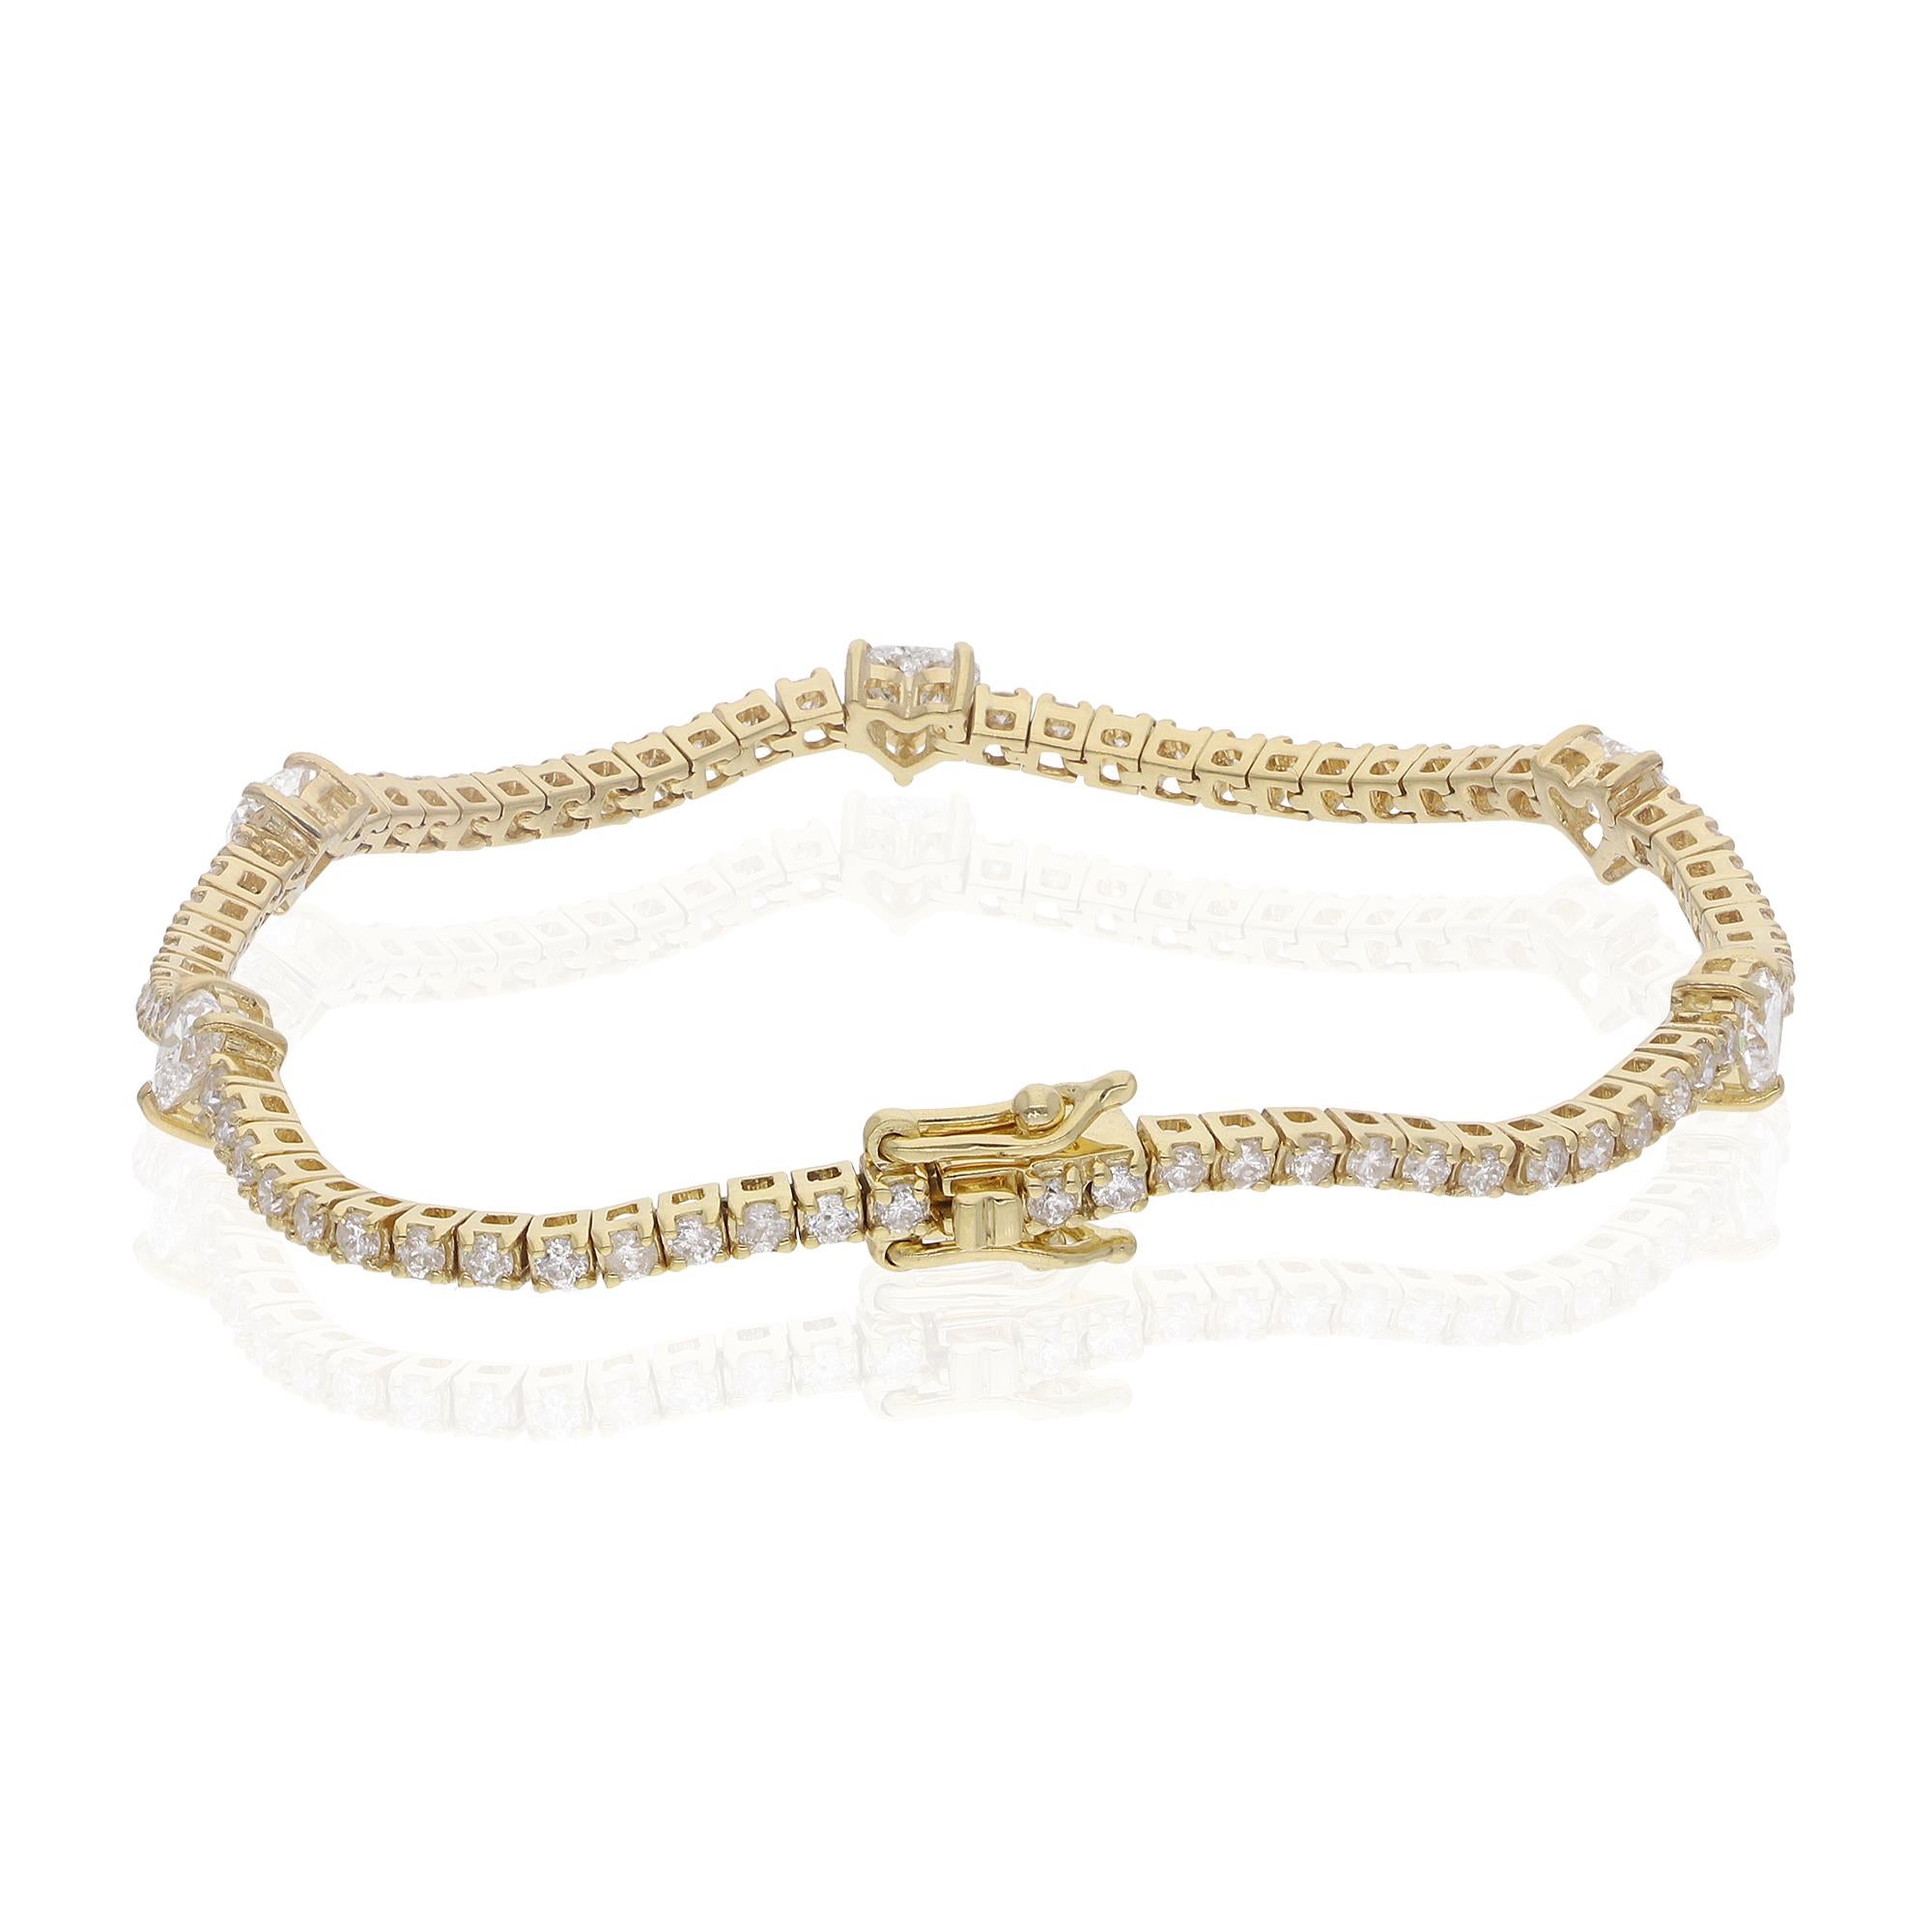 Item Code :- SFBR-4200
Gross Wt. :- 5.65 gm
14k Solid Yellow Gold Wt. :- 5.22 gm
Natural Diamond Wt. :- 2.16 Ct. ( AVERAGE DIAMOND CLARITY SI1-SI2 & COLOR H-I )
Bracelet Size :- 6.25 Inches Long

✦ Sizing
.....................
We can adjust most